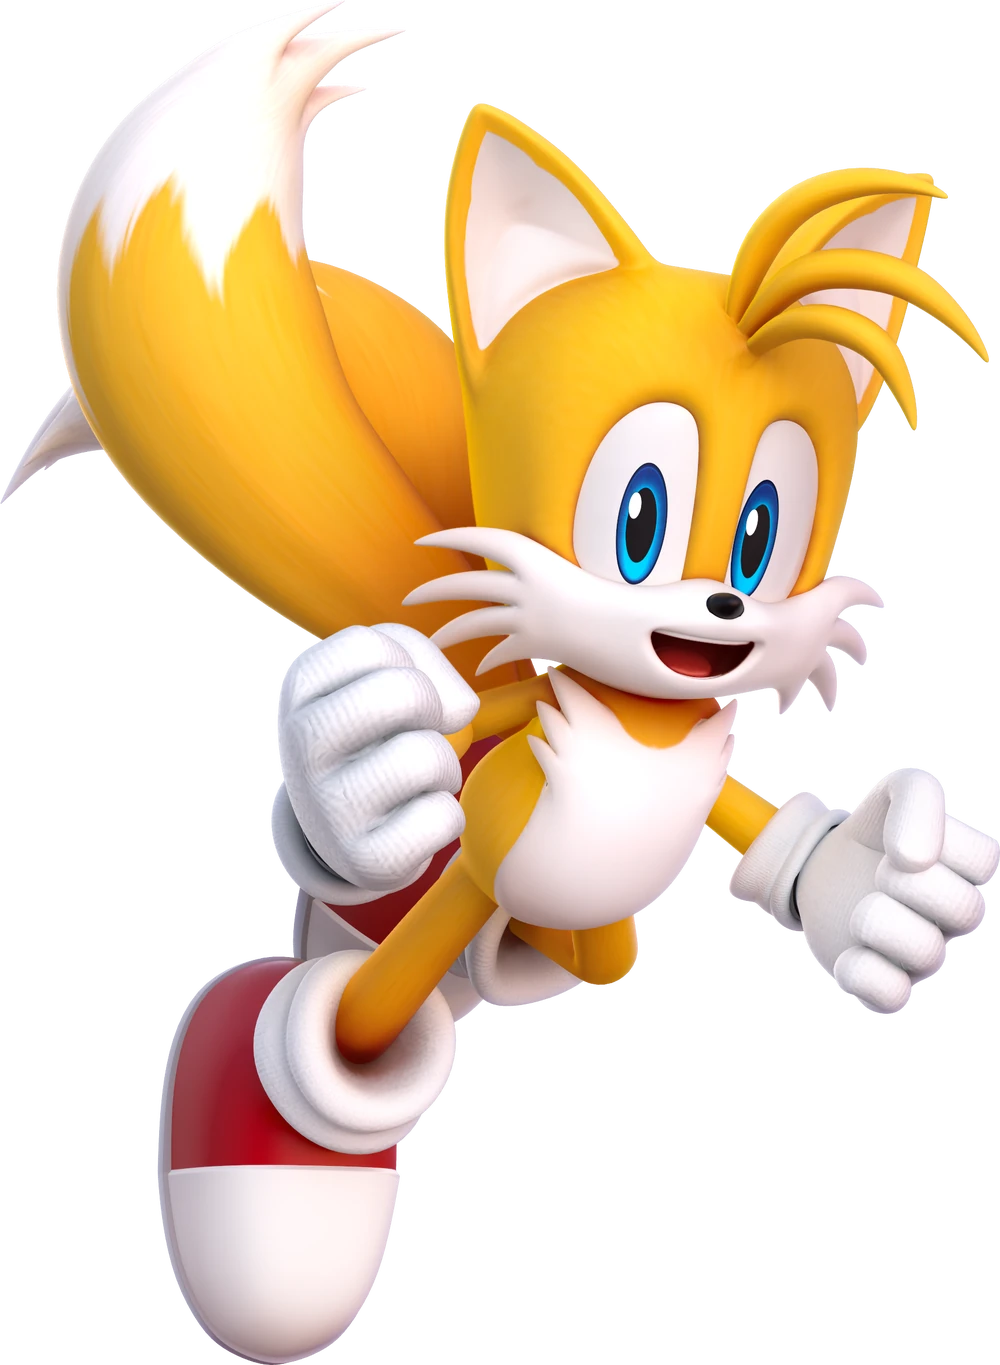 Classic Tails Sonic 2 Render by creepertoscano on DeviantArt